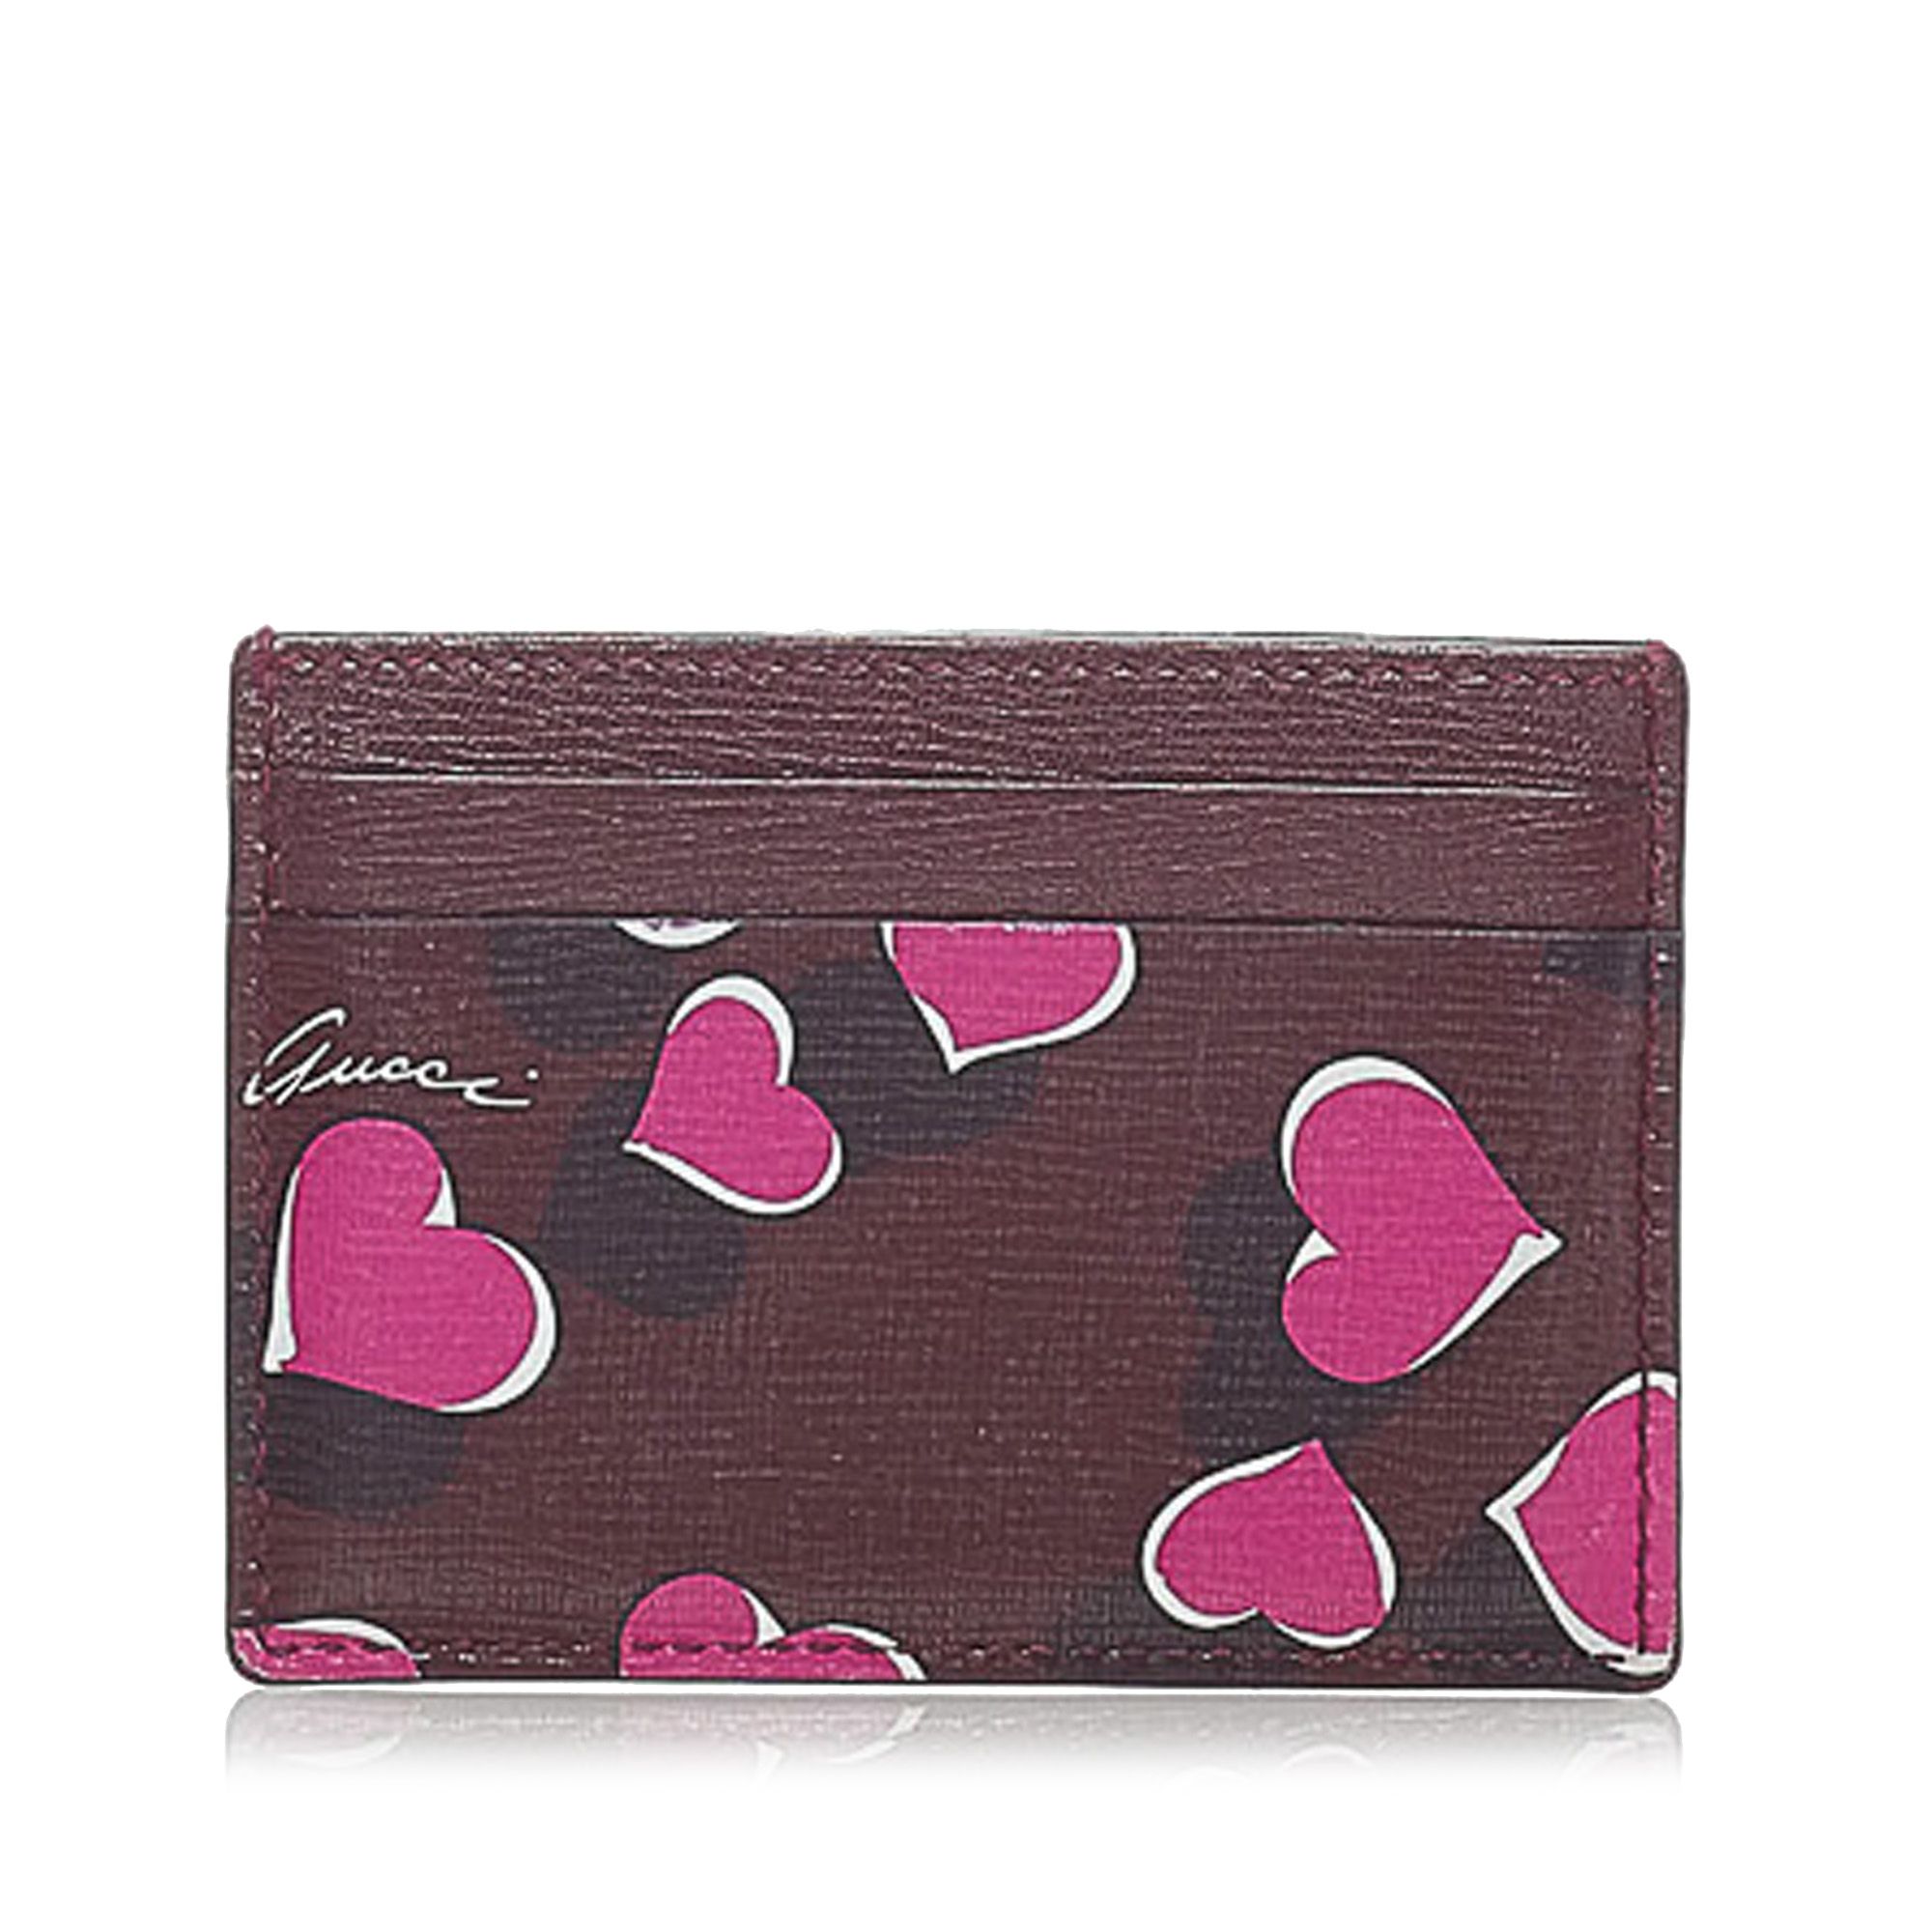 VINTAGE. RRP AS NEW. This card holder features a leather body with heart print and slip pockets.Exterior front is out of shape and stained with others. Interior pocket is stained with others.

Dimensions:
Length 7cm
Width 9.5cm

Original Accessories: This item has no other original accessories.

Serial Number: 334483
Color: Red x Bordeaux x Multi
Material: Leather x Calf
Country of Origin: Italy
Boutique Reference: SSU160330K1342


Product Rating: GoodCondition

Certificate of Authenticity is available upon request with no extra fee required. Please contact our customer service team.